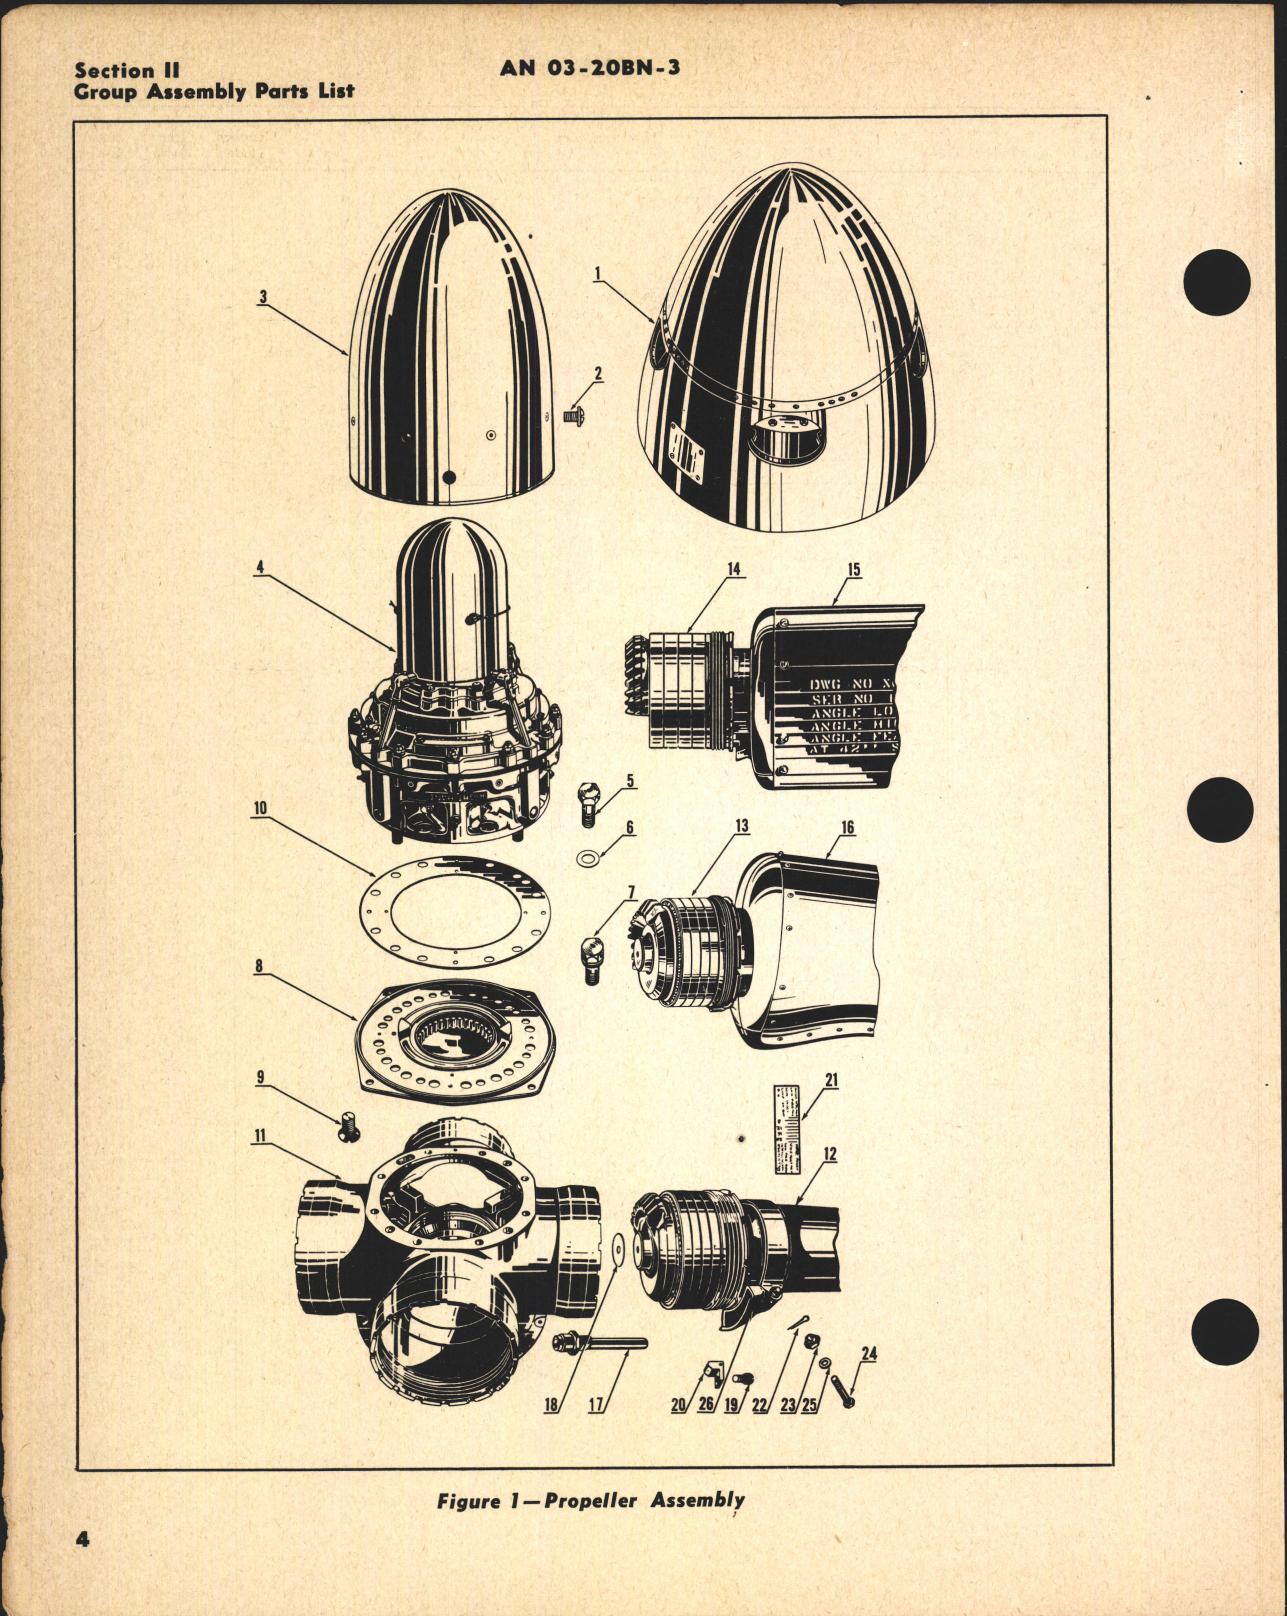 Sample page 8 from AirCorps Library document: Parts Catalog for Curtiss Electric Propeller Models C644S-A and C644S-B